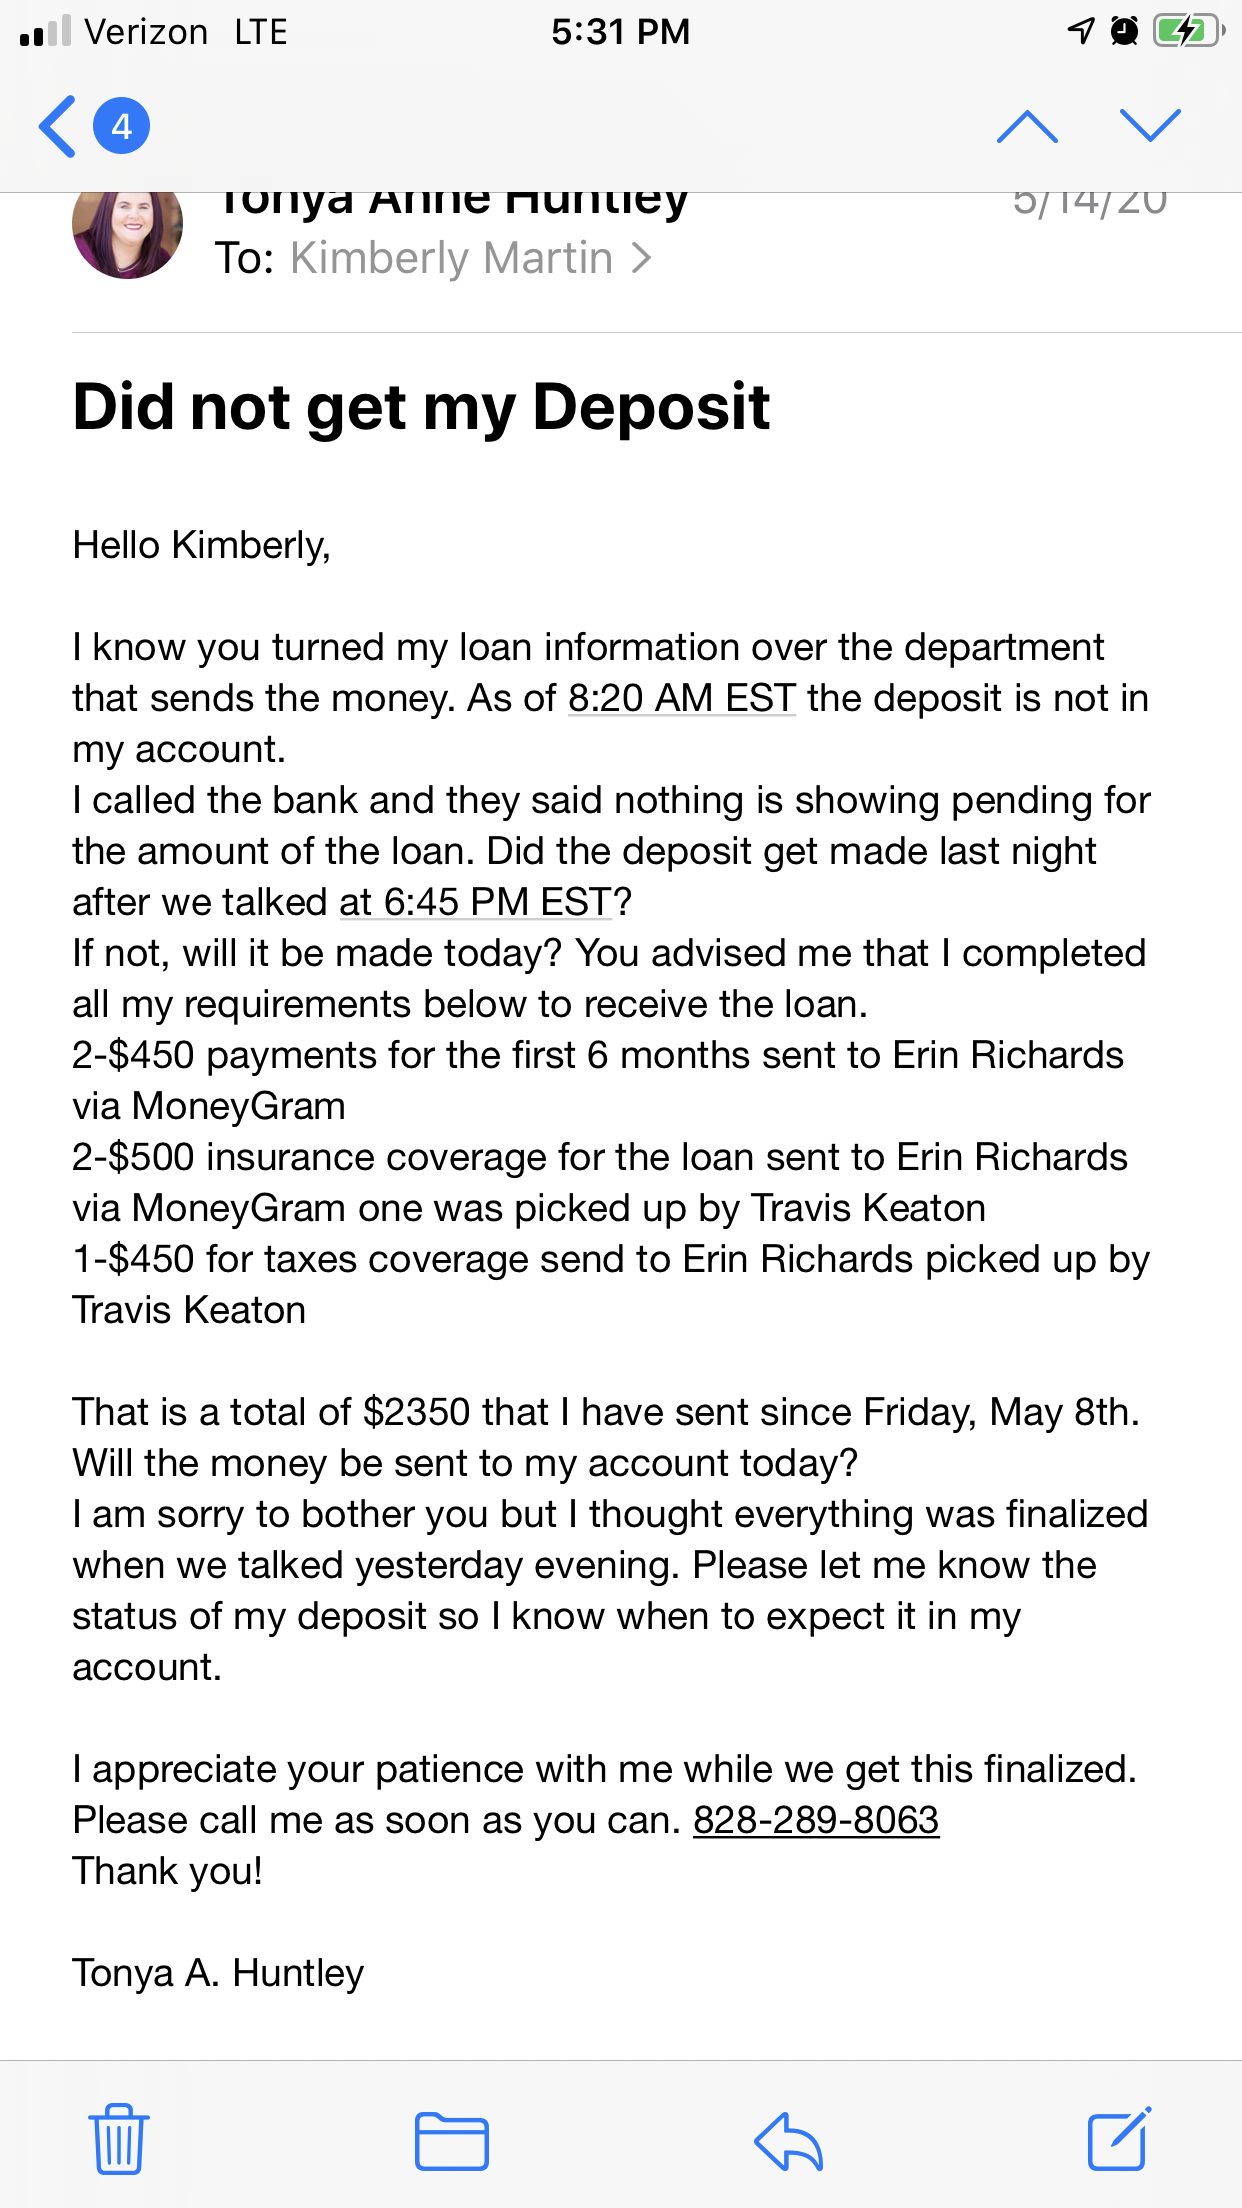 Email requesting refund